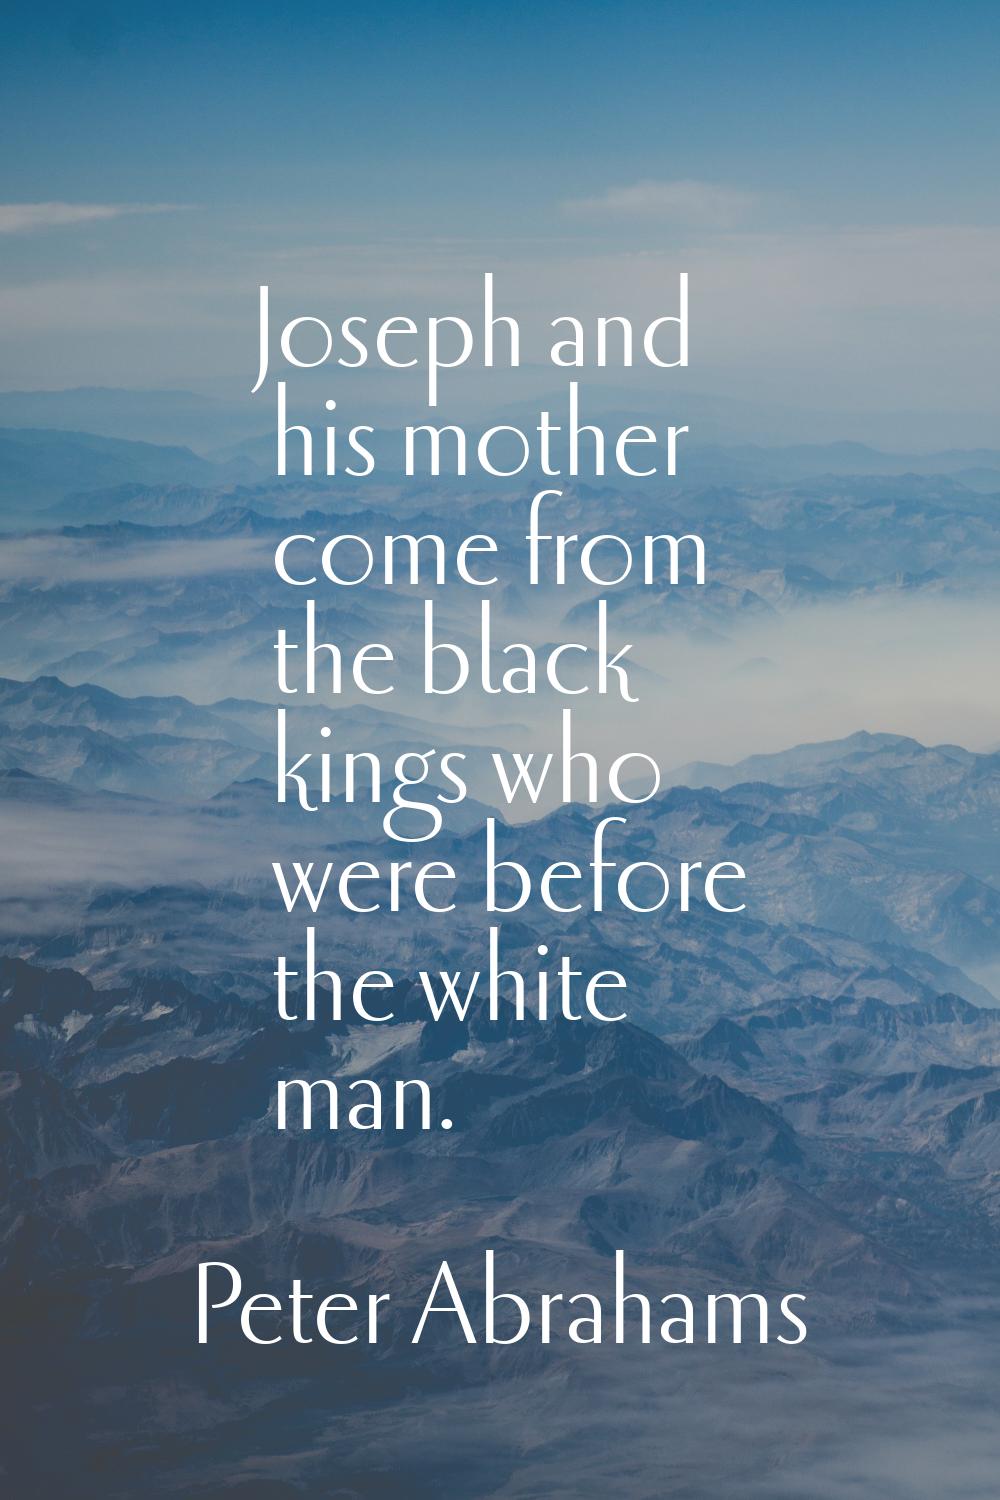 Joseph and his mother come from the black kings who were before the white man.